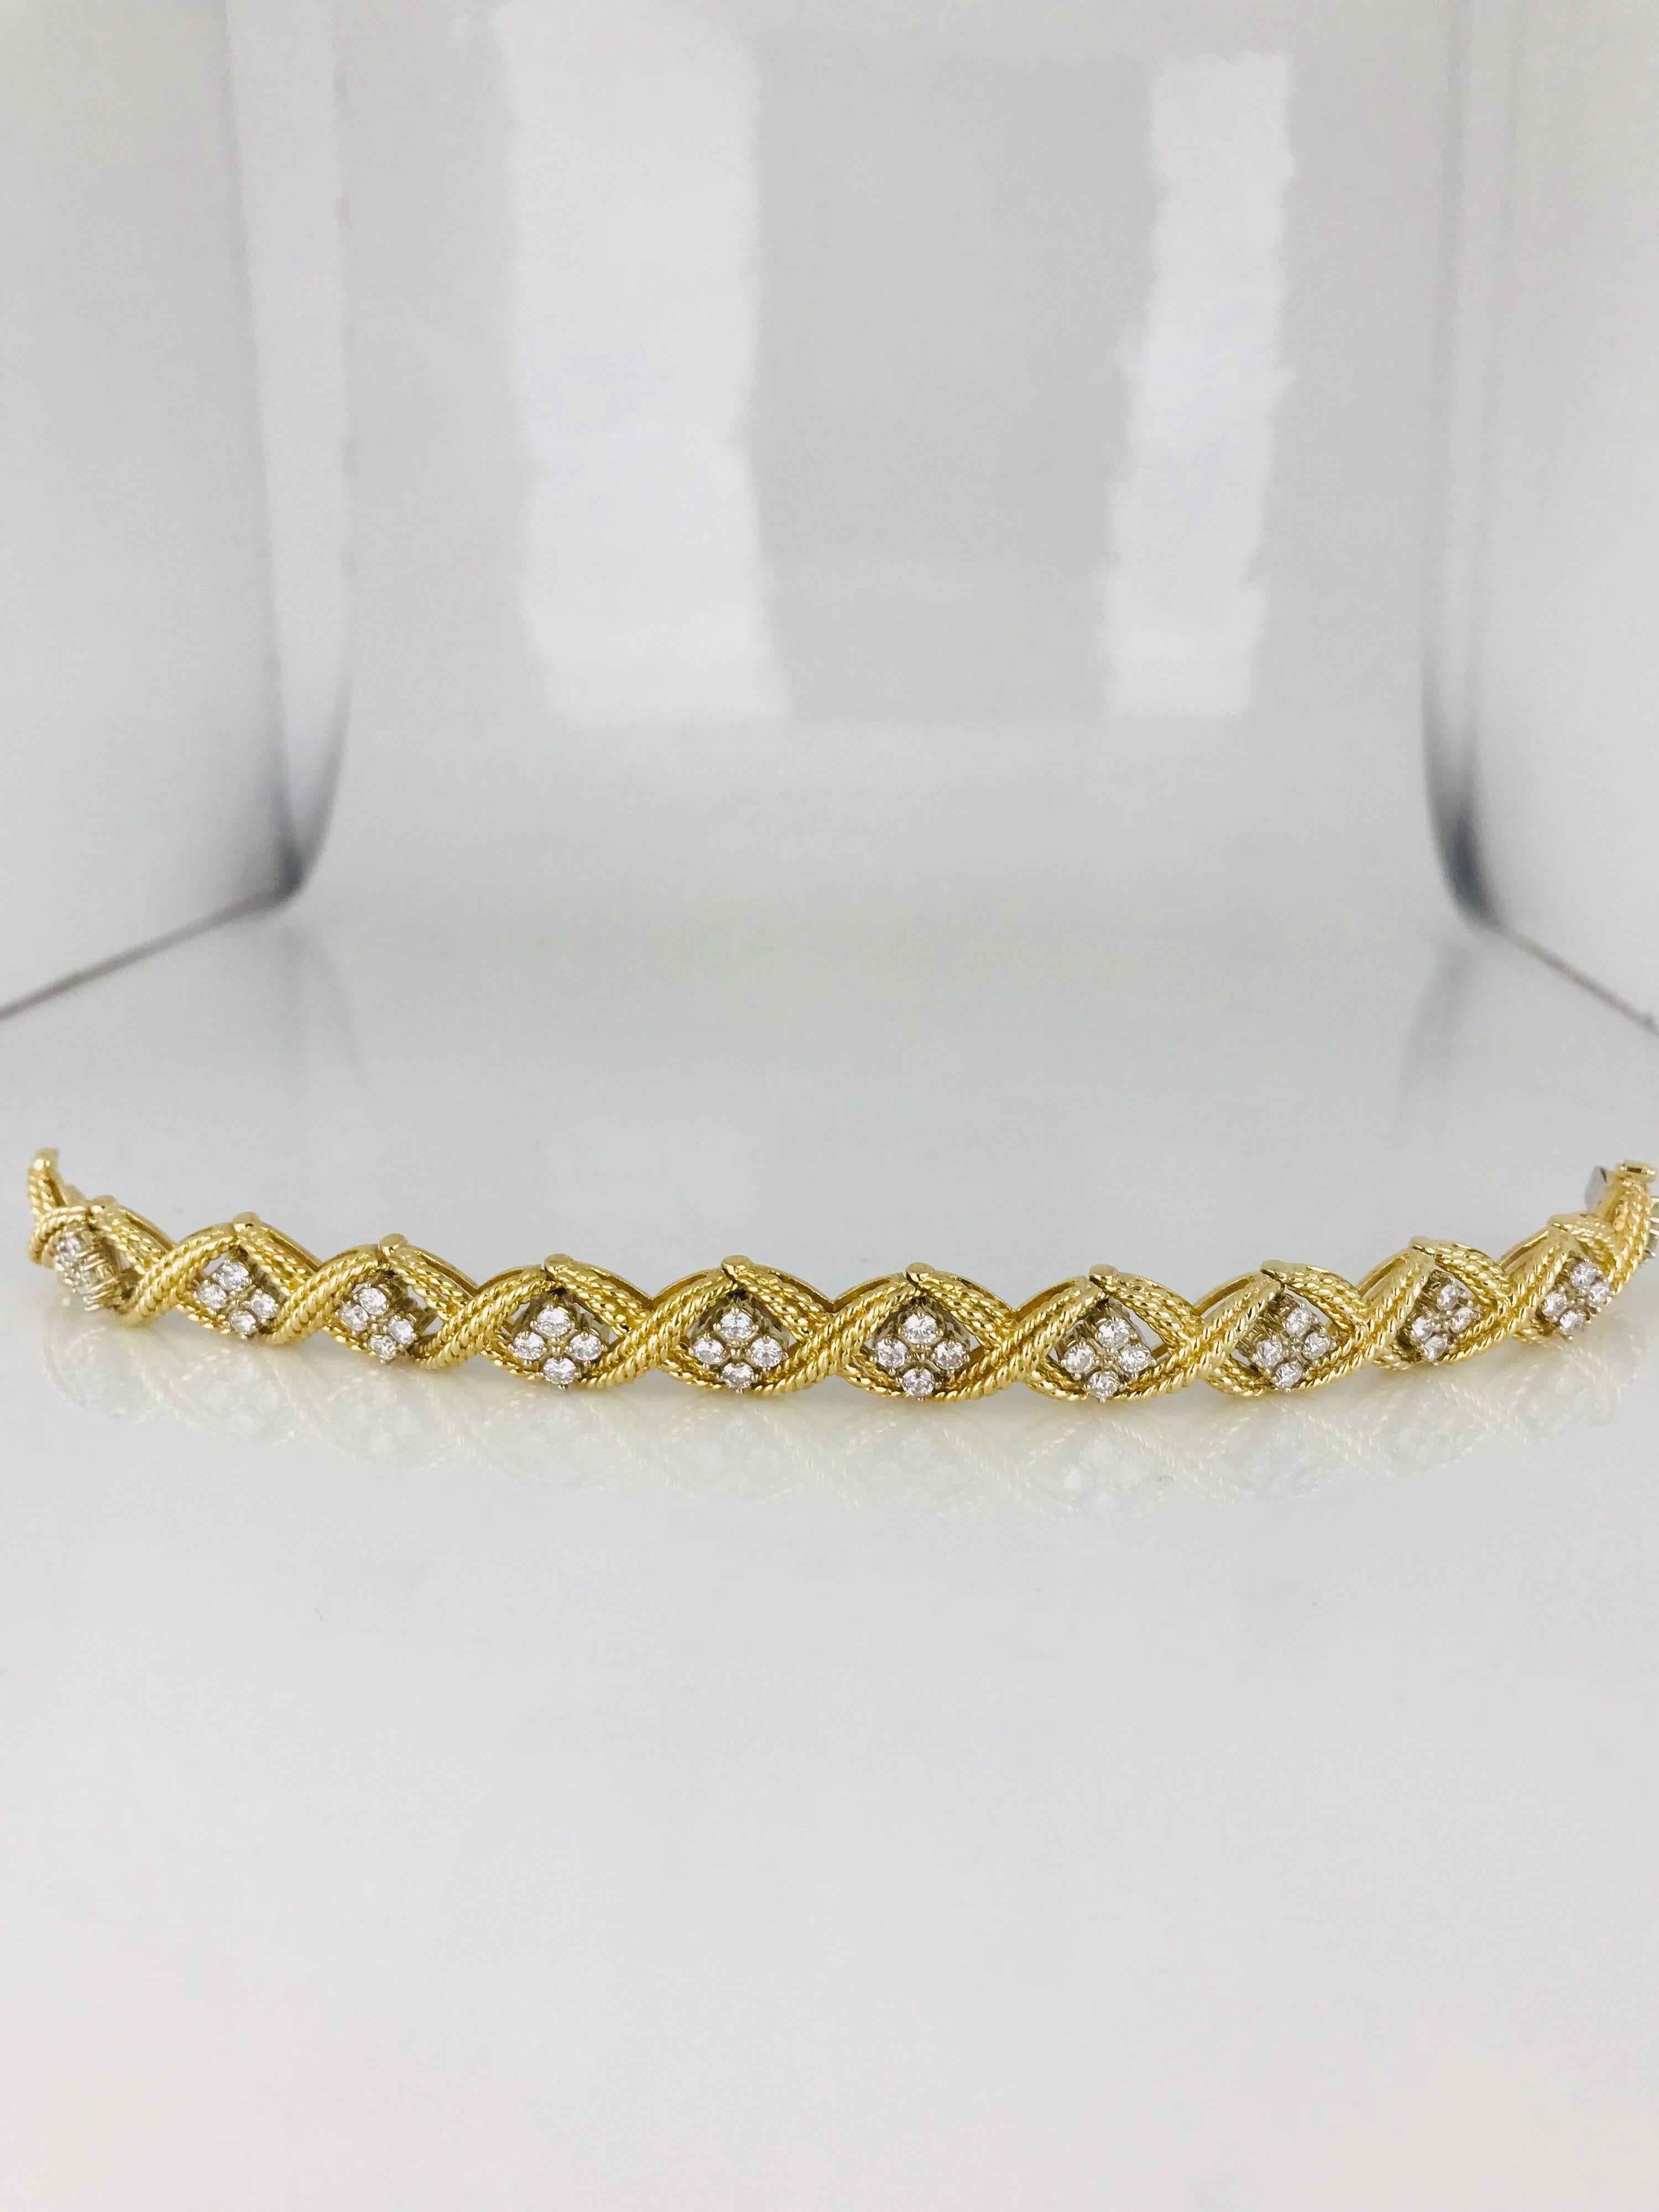 14 karat, Mid Century diamond bracelet, with over 3.00 carats of diamonds. A total of (44) round brilliant-cut diamonds average to 2.70 millimeters in diameter having a total weight of approximately 3.00 carats. 
The gold is heavy weighing 39.9